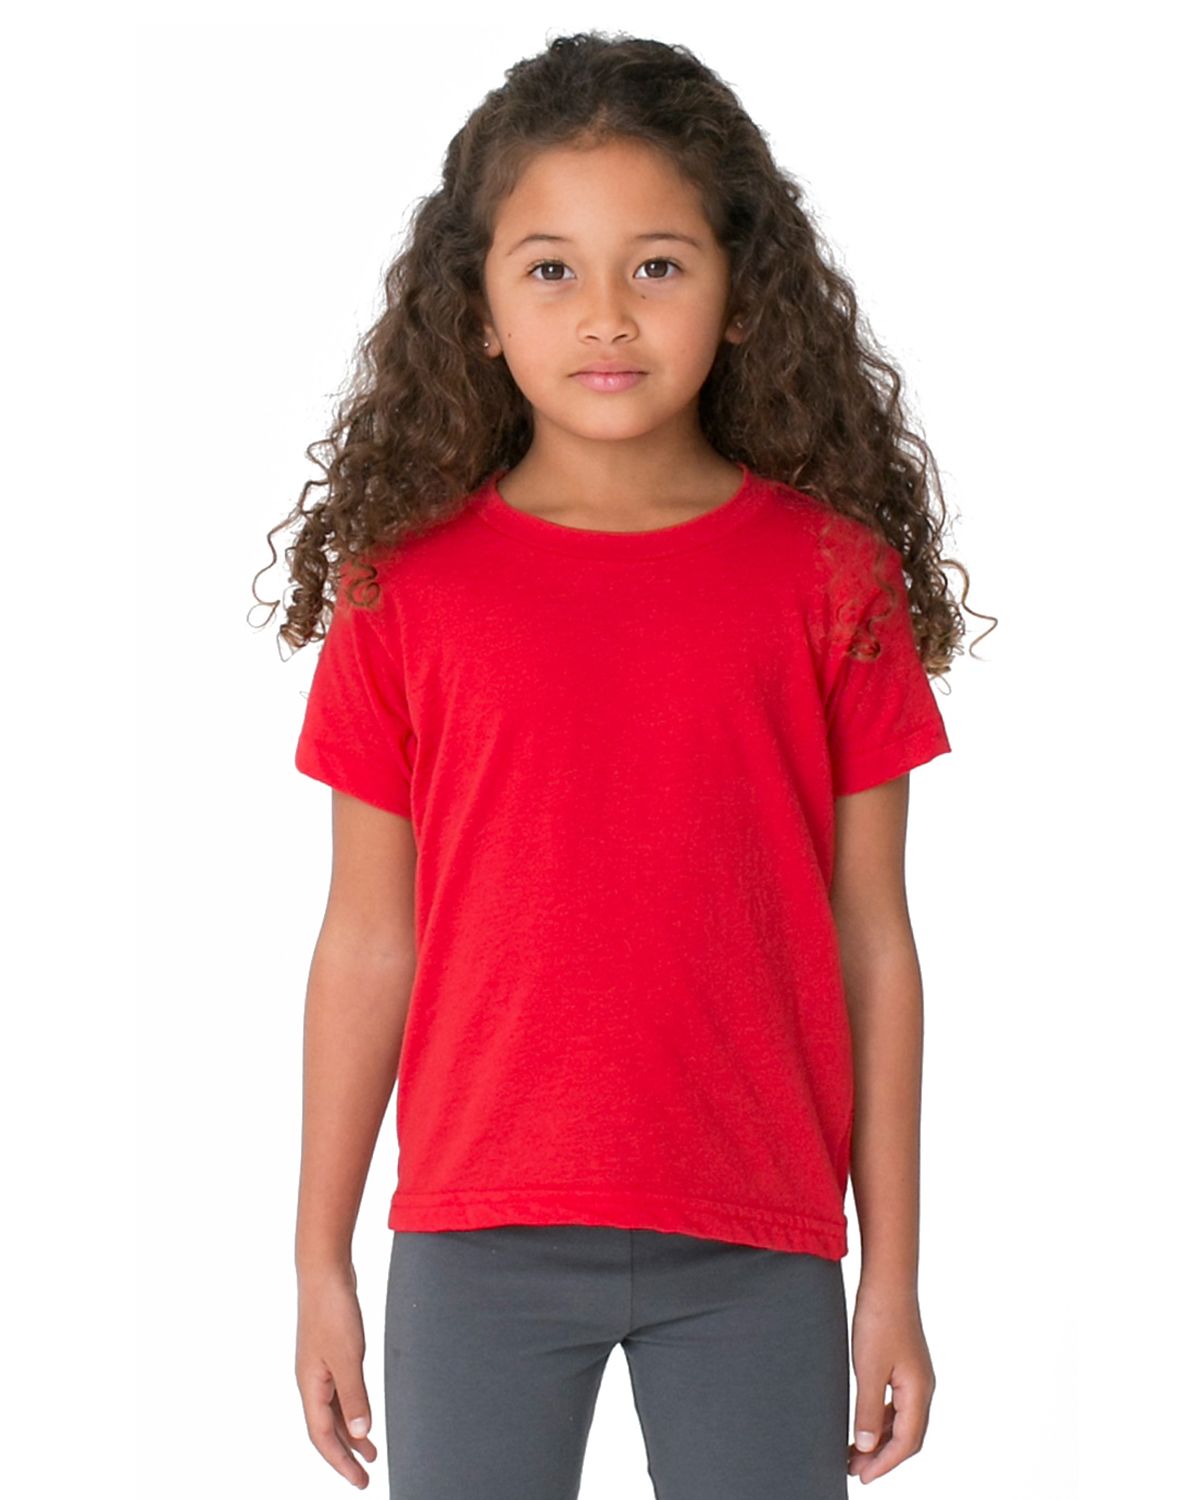 American Apparel Toddlers Poly-cotton Short-sleeve Crewneck